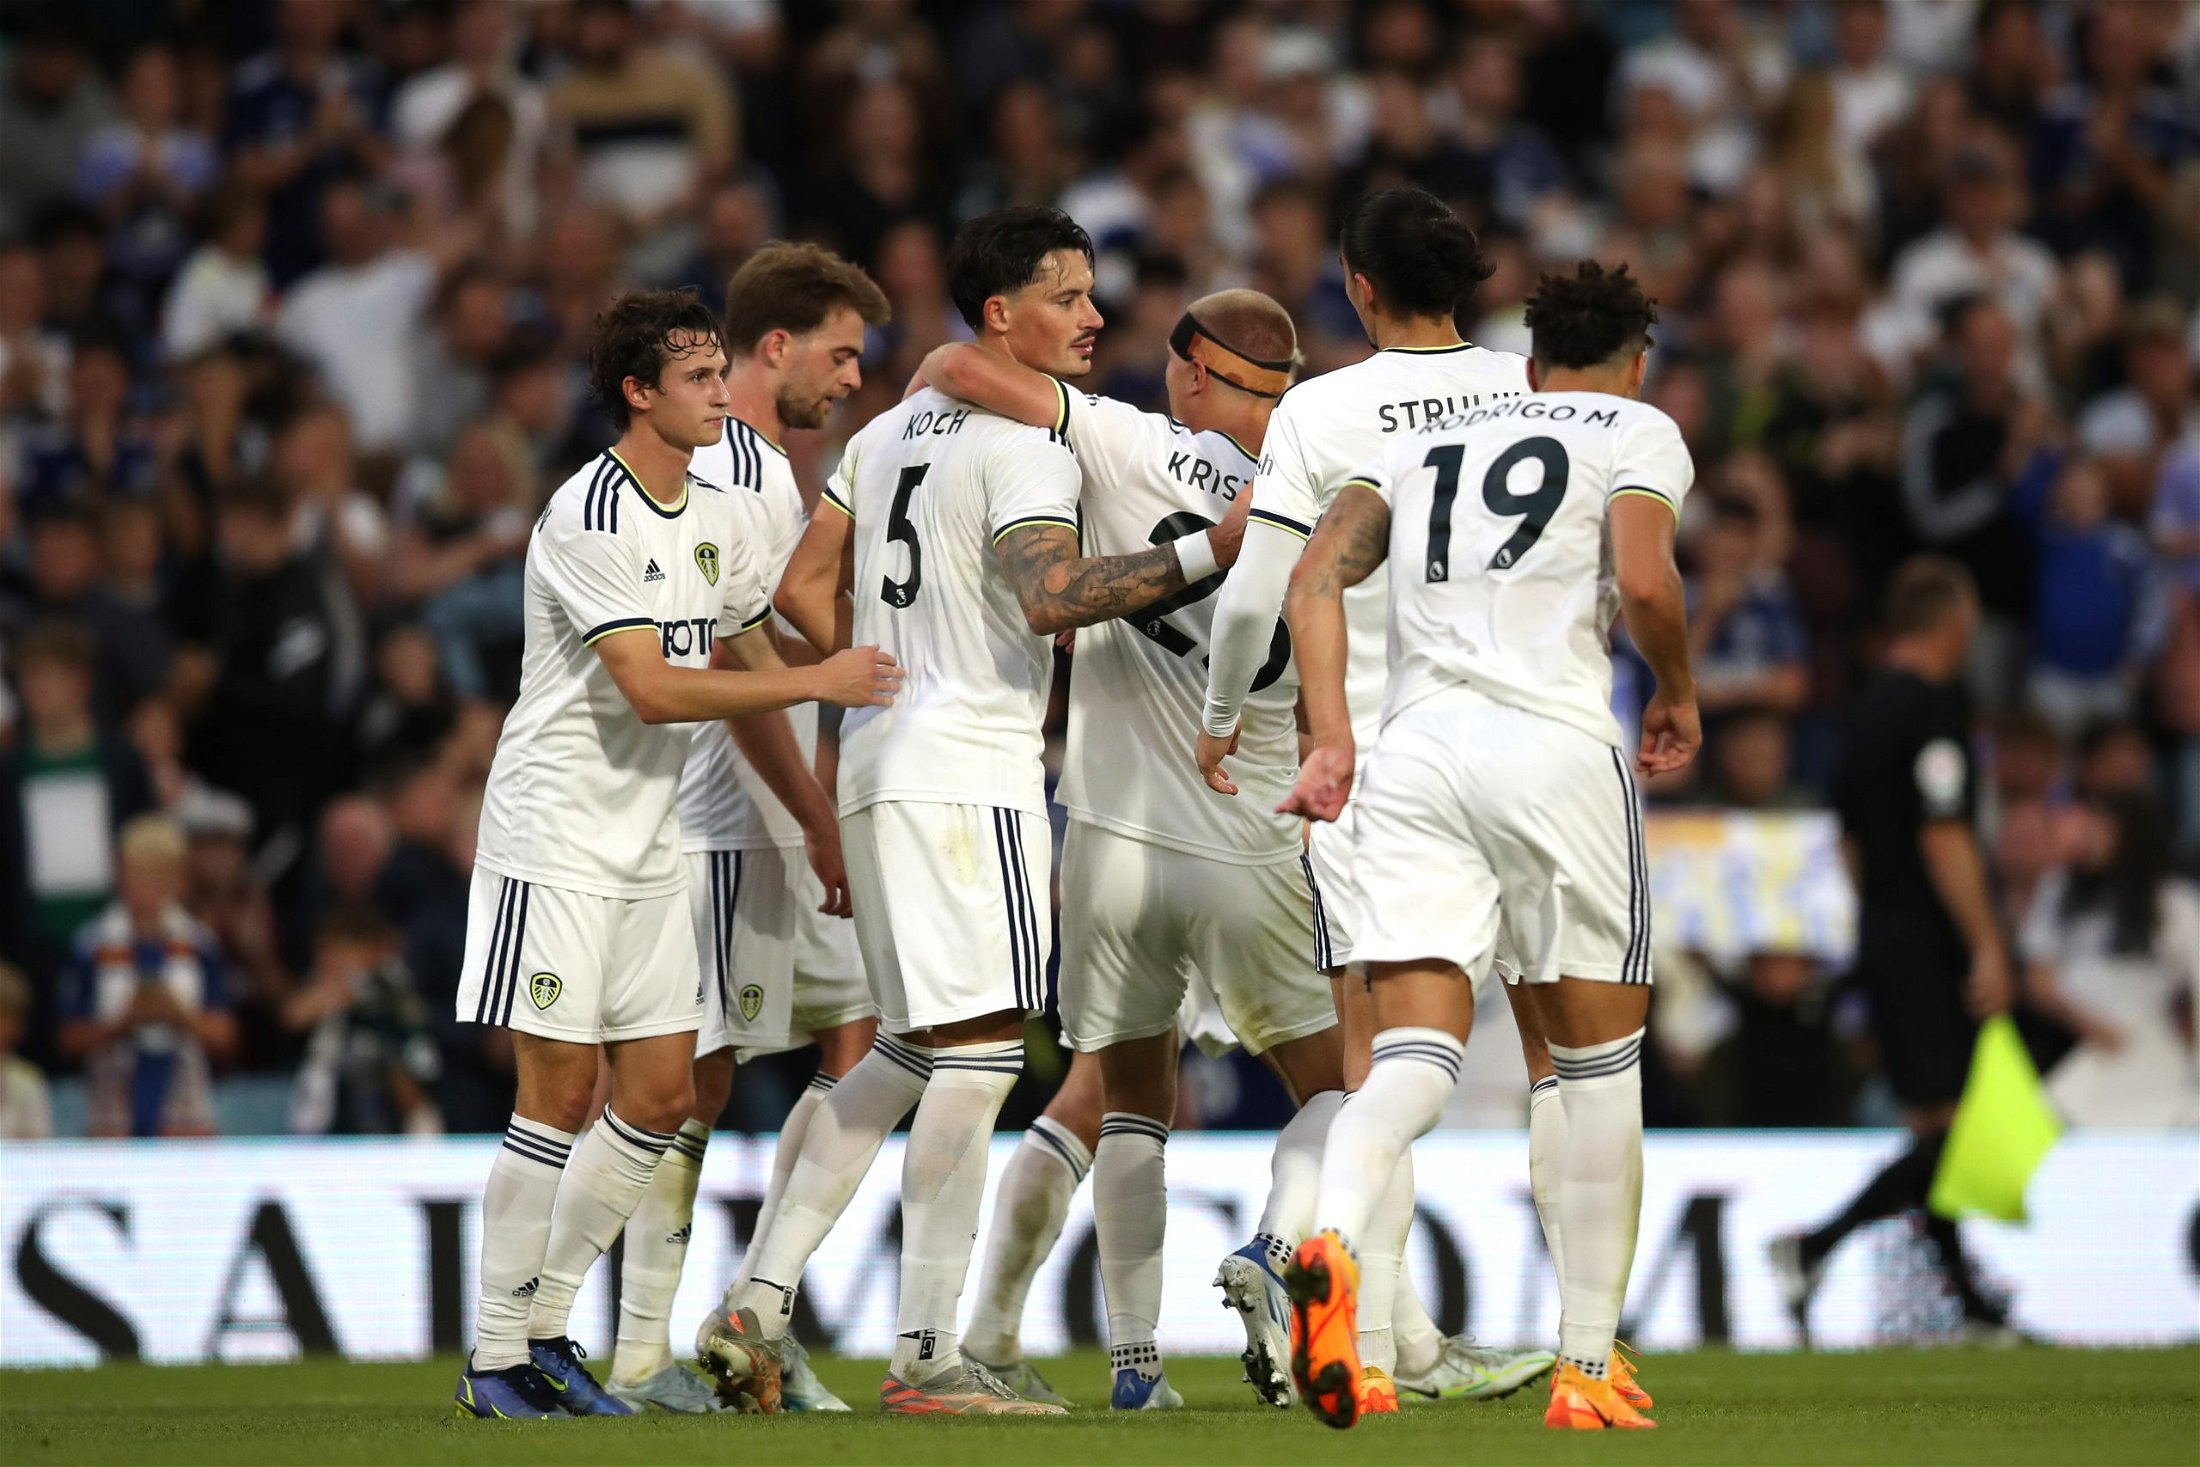 3 key things we learnt about Leeds United over the course of pre-season